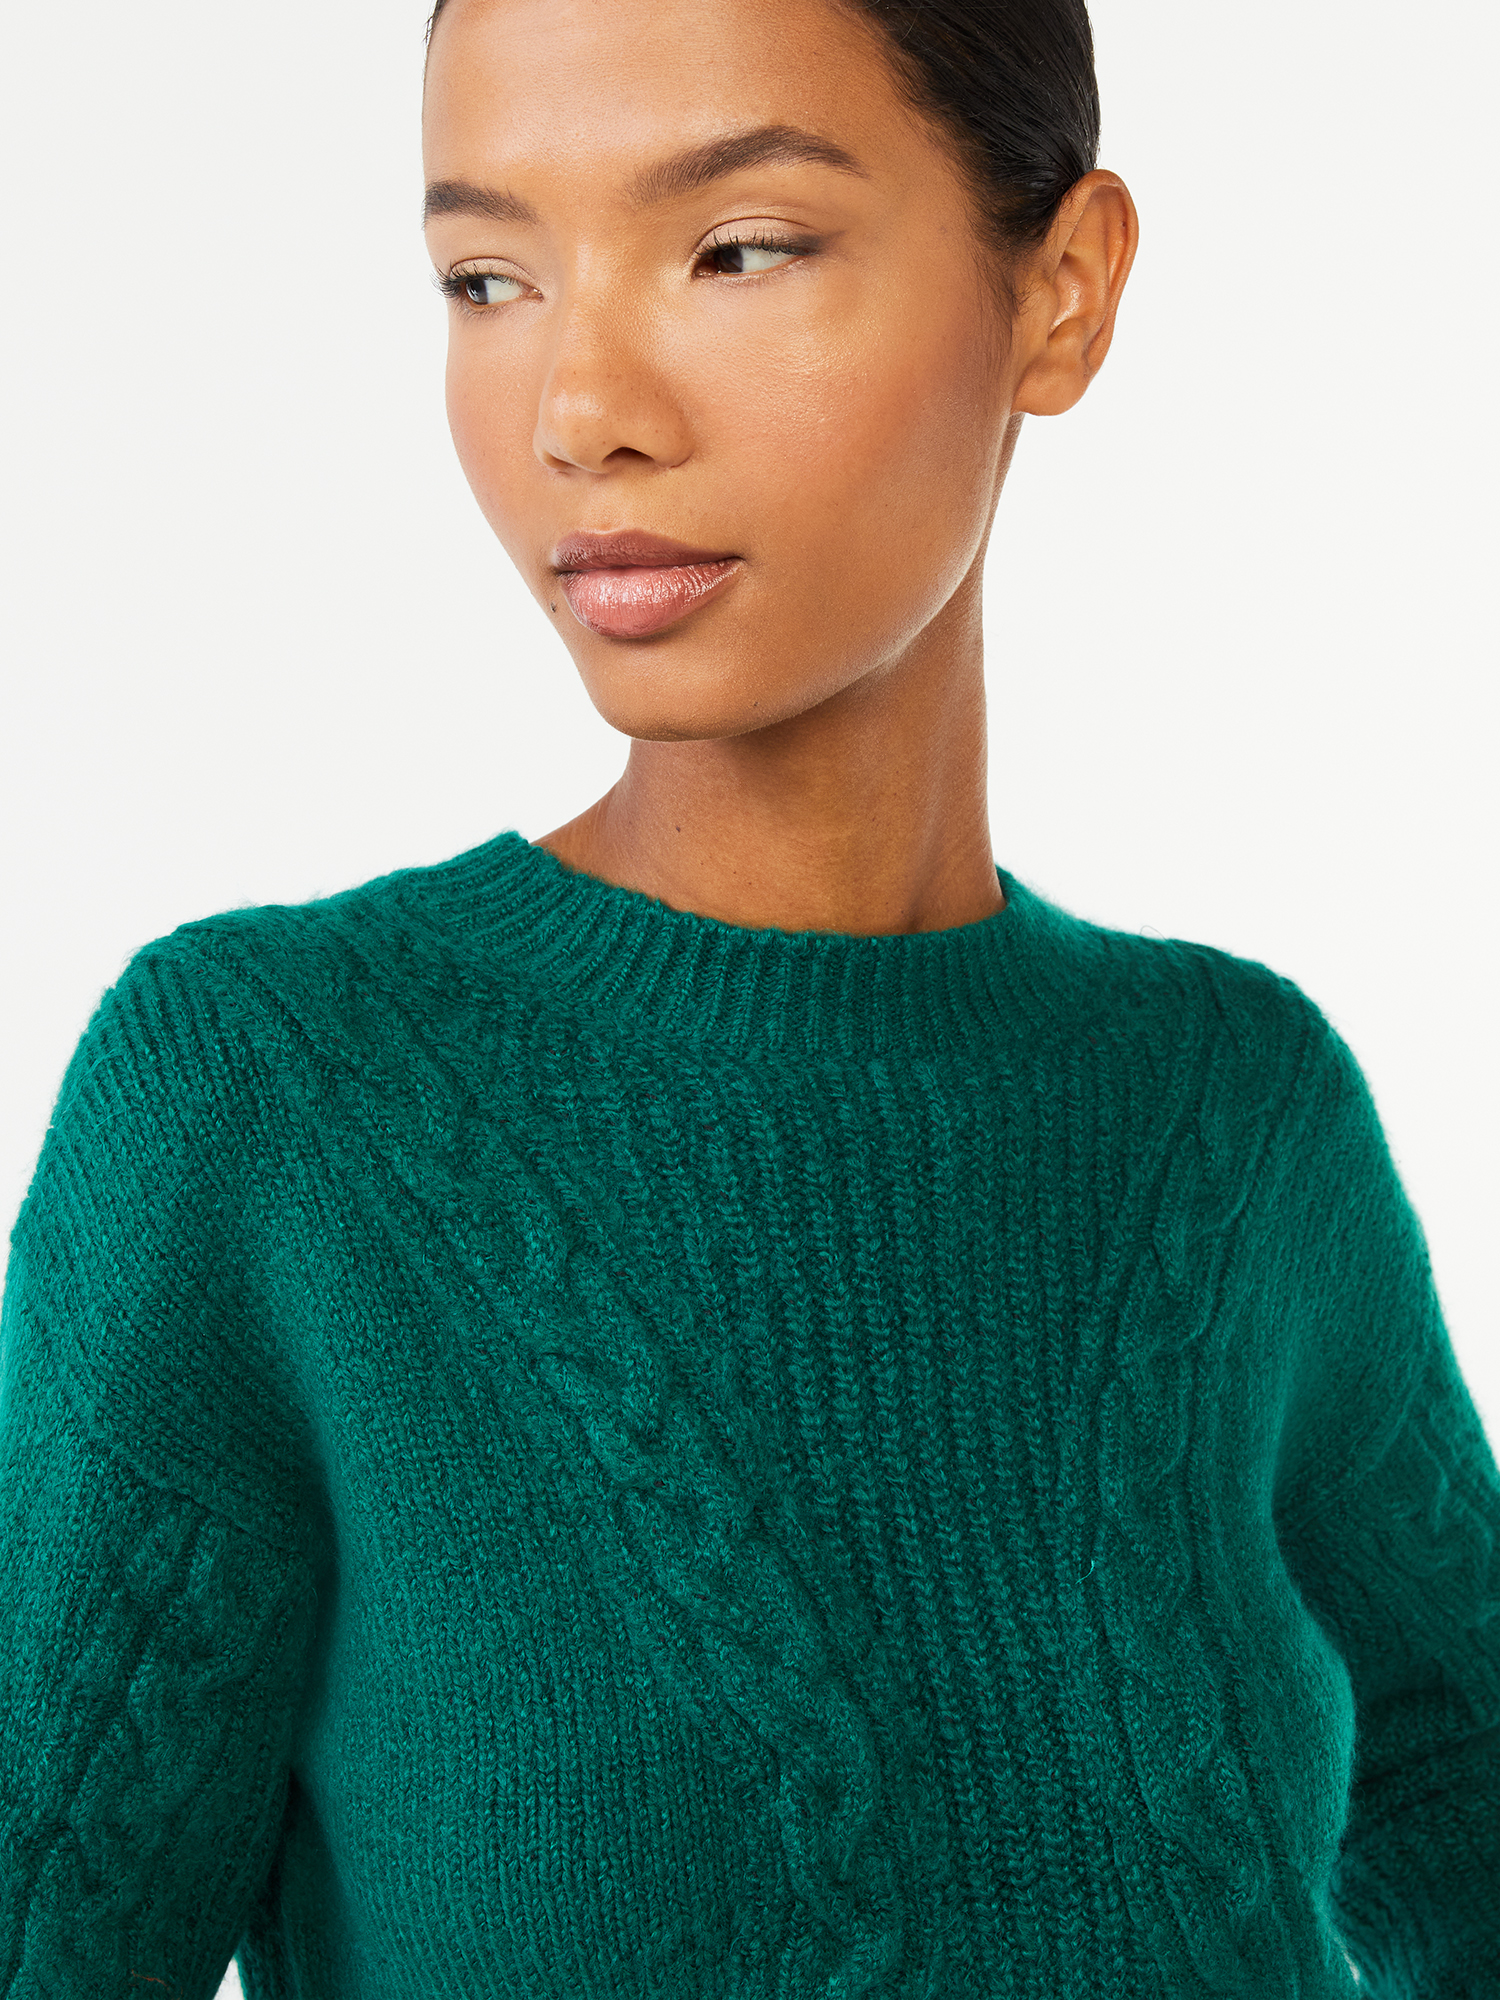 Scoop Women's Textured Cable Knit Sweater - image 2 of 5